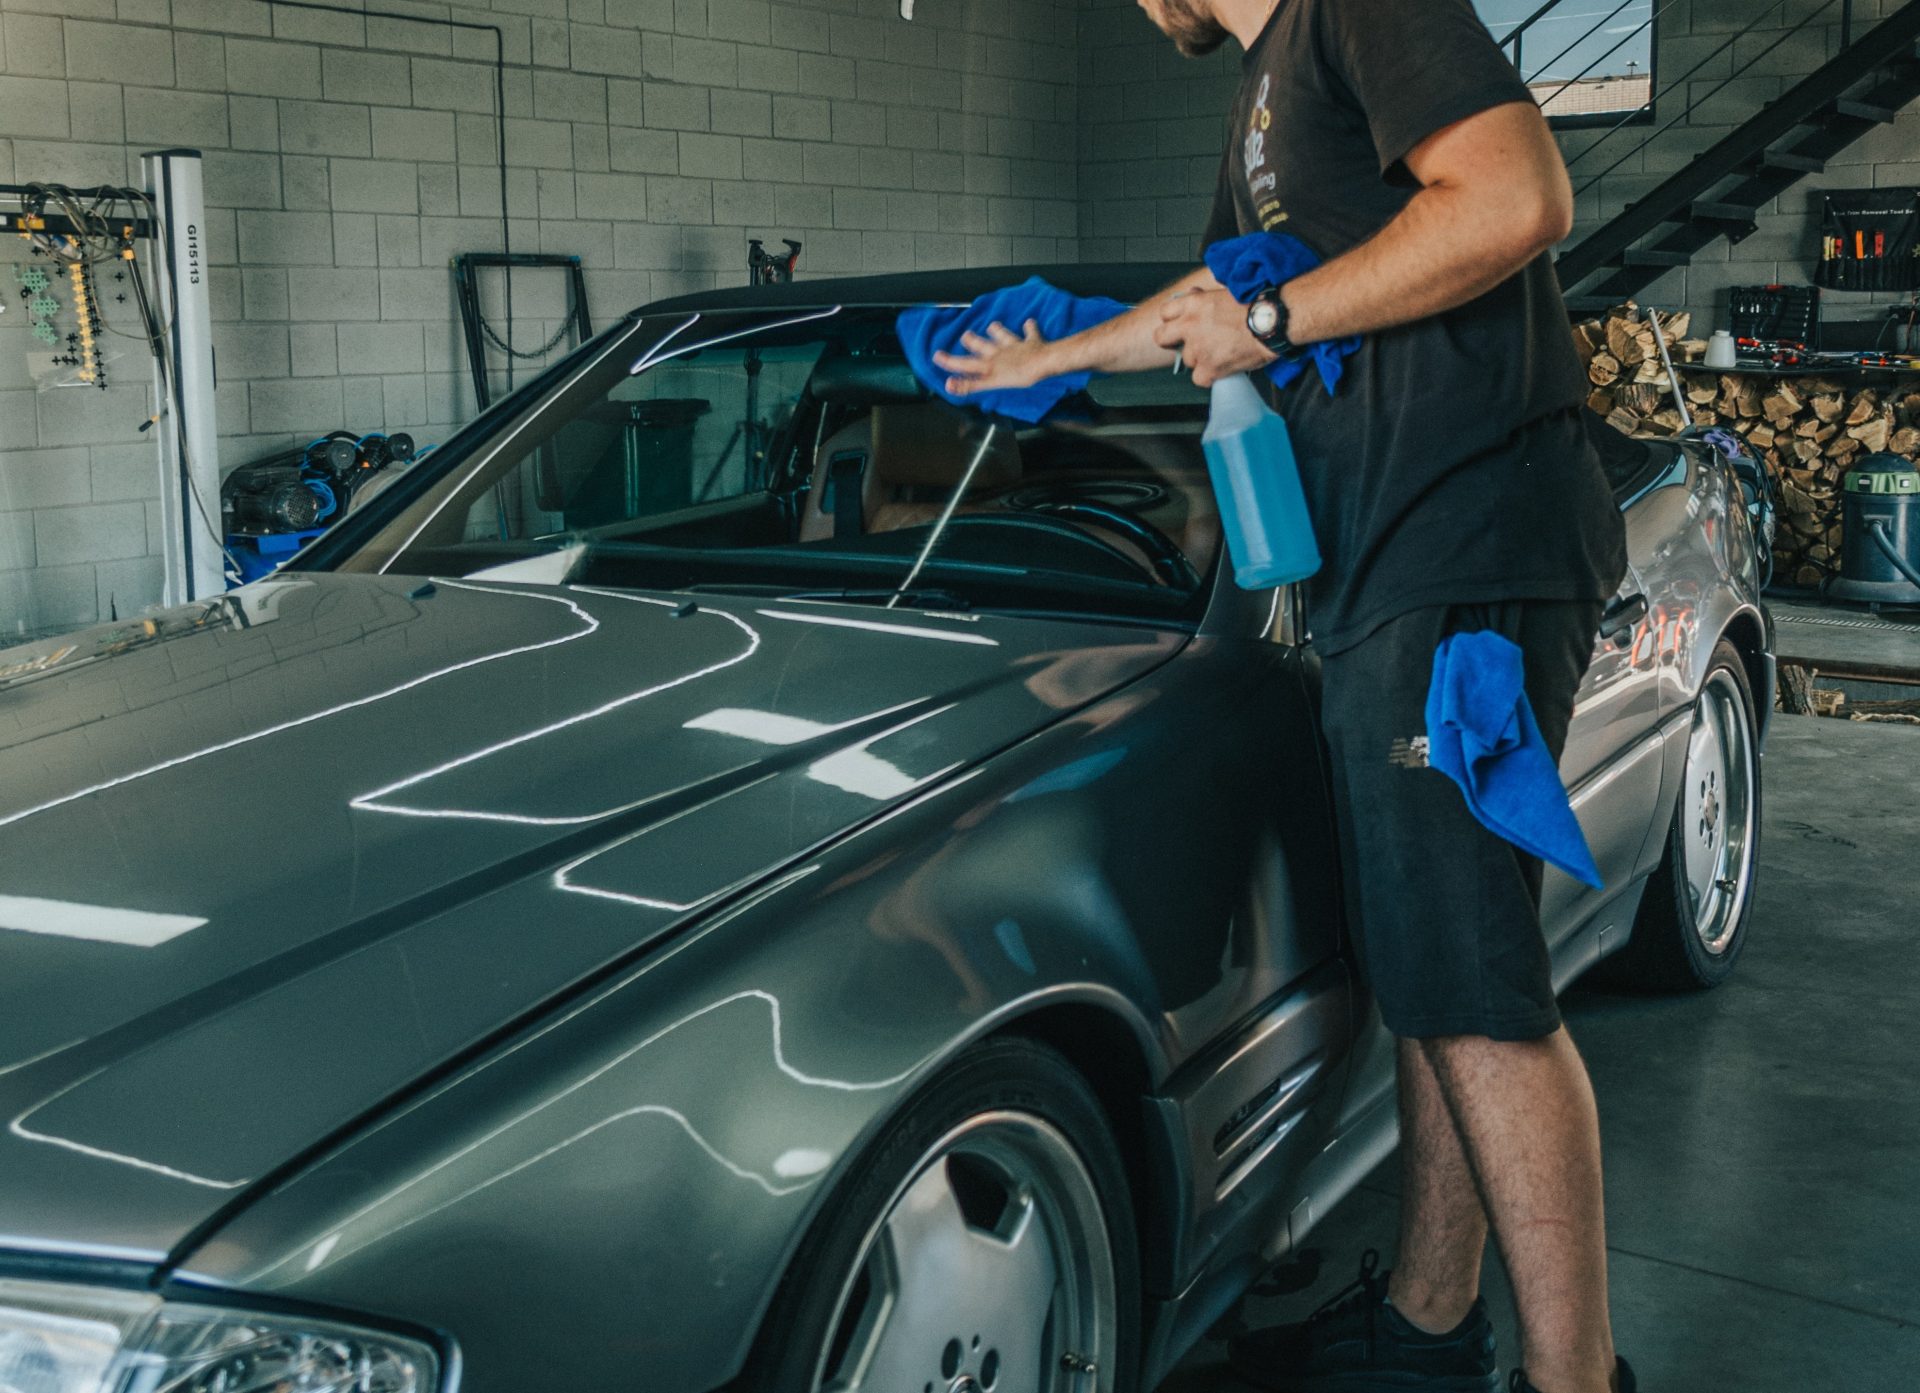 A skilled professional meticulously wipes and details a car, bringing out its natural shine through careful cleaning and detailing processes, resulting in a brilliantly polished and lustrous finish